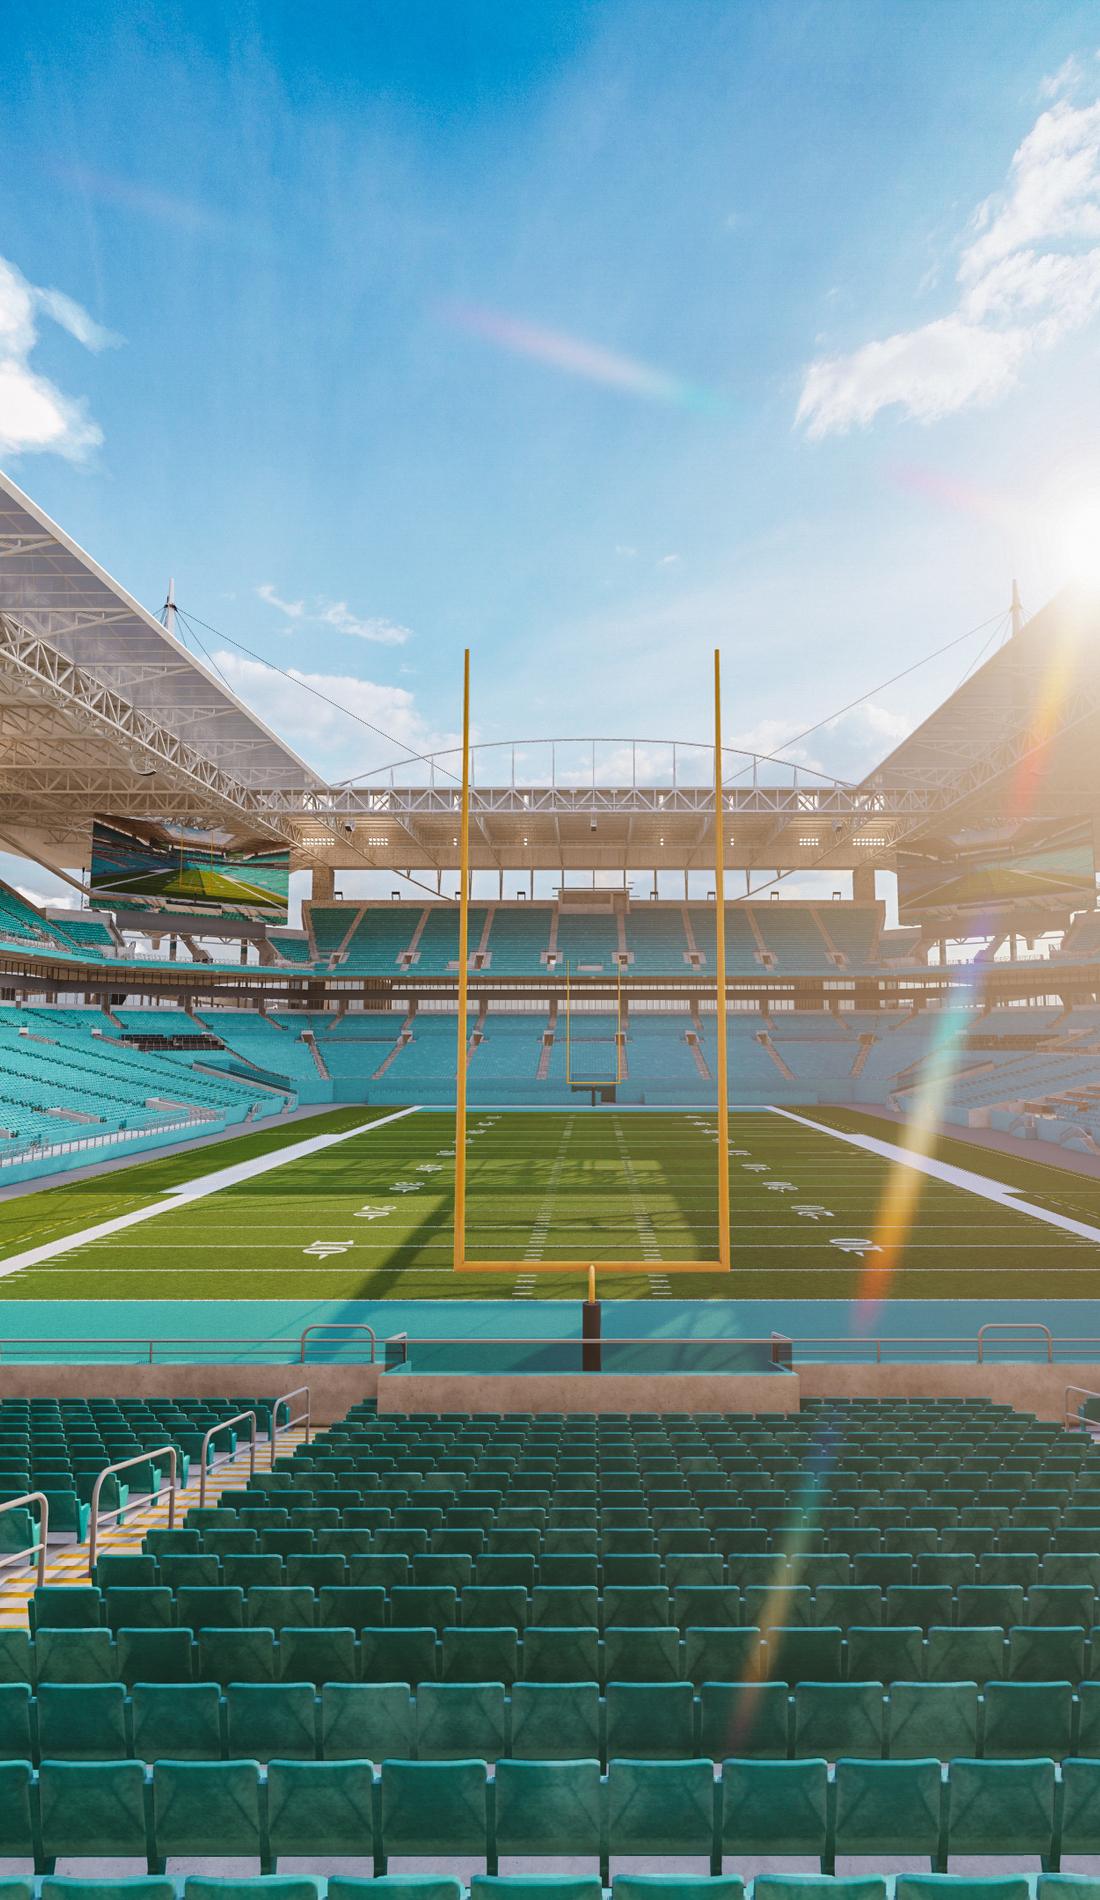 miami dolphins season tickets for sale